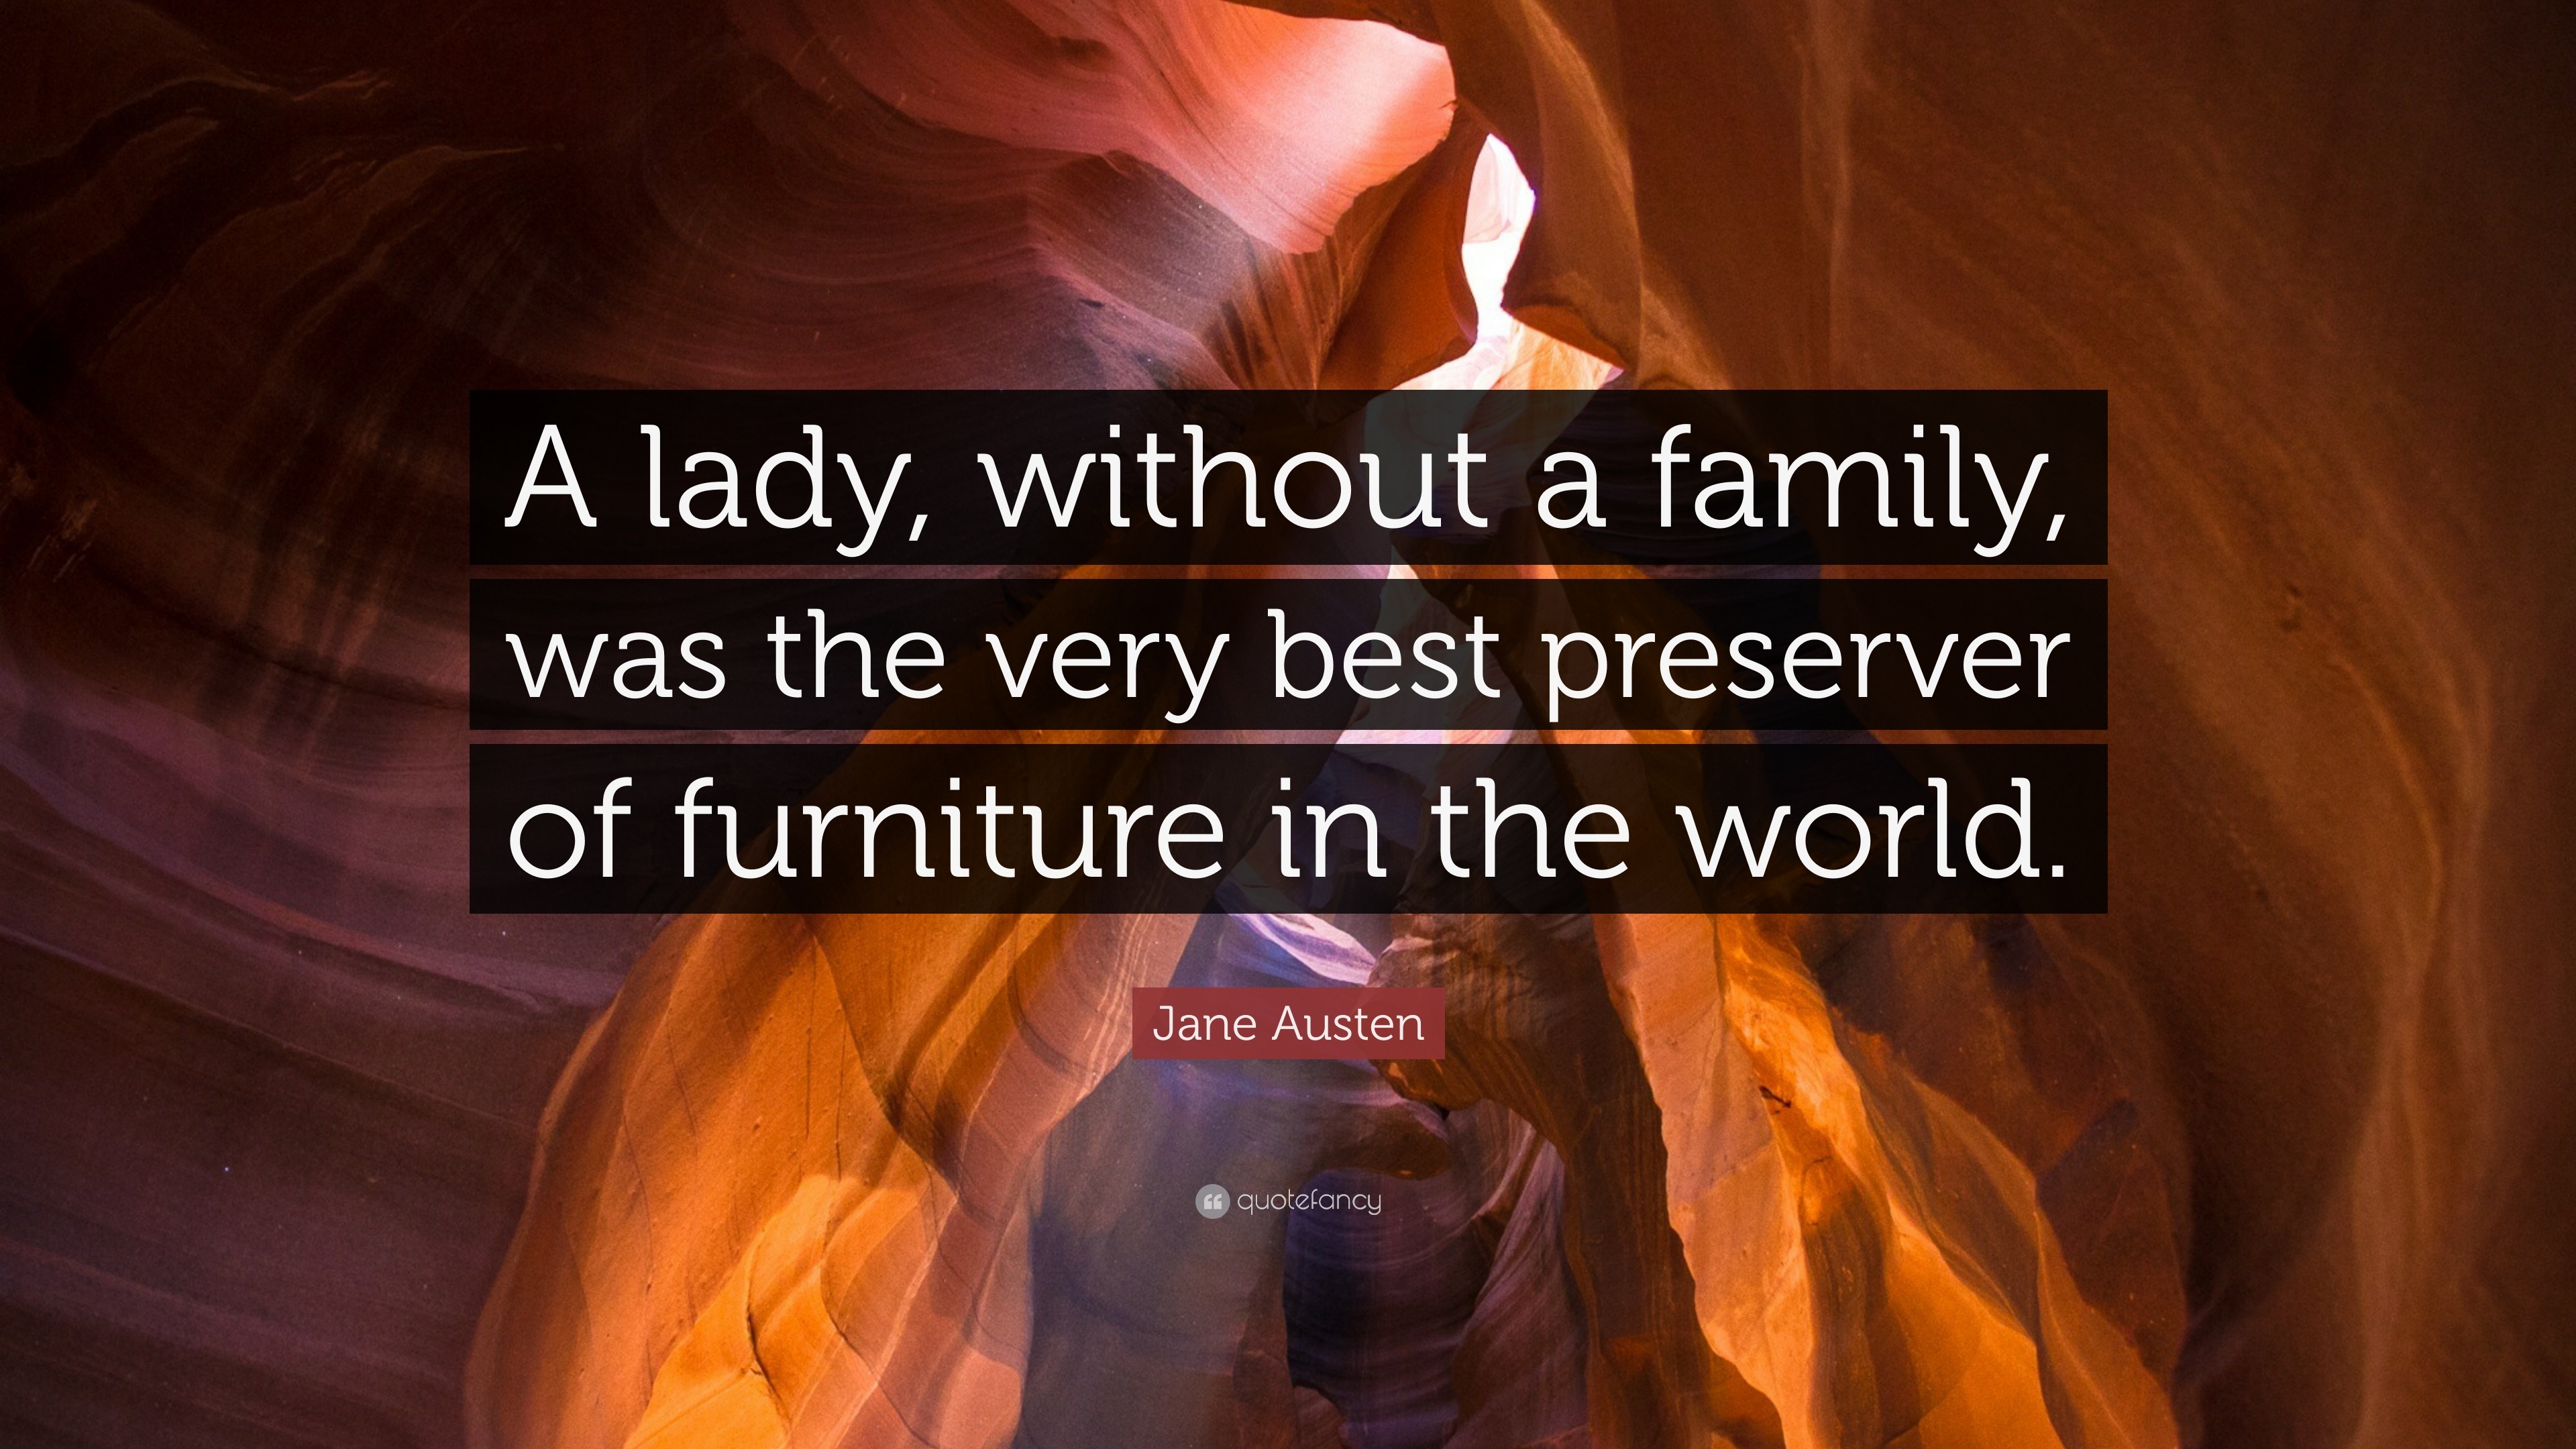 Jane Austen Quote: “A lady, without a family, was the very best